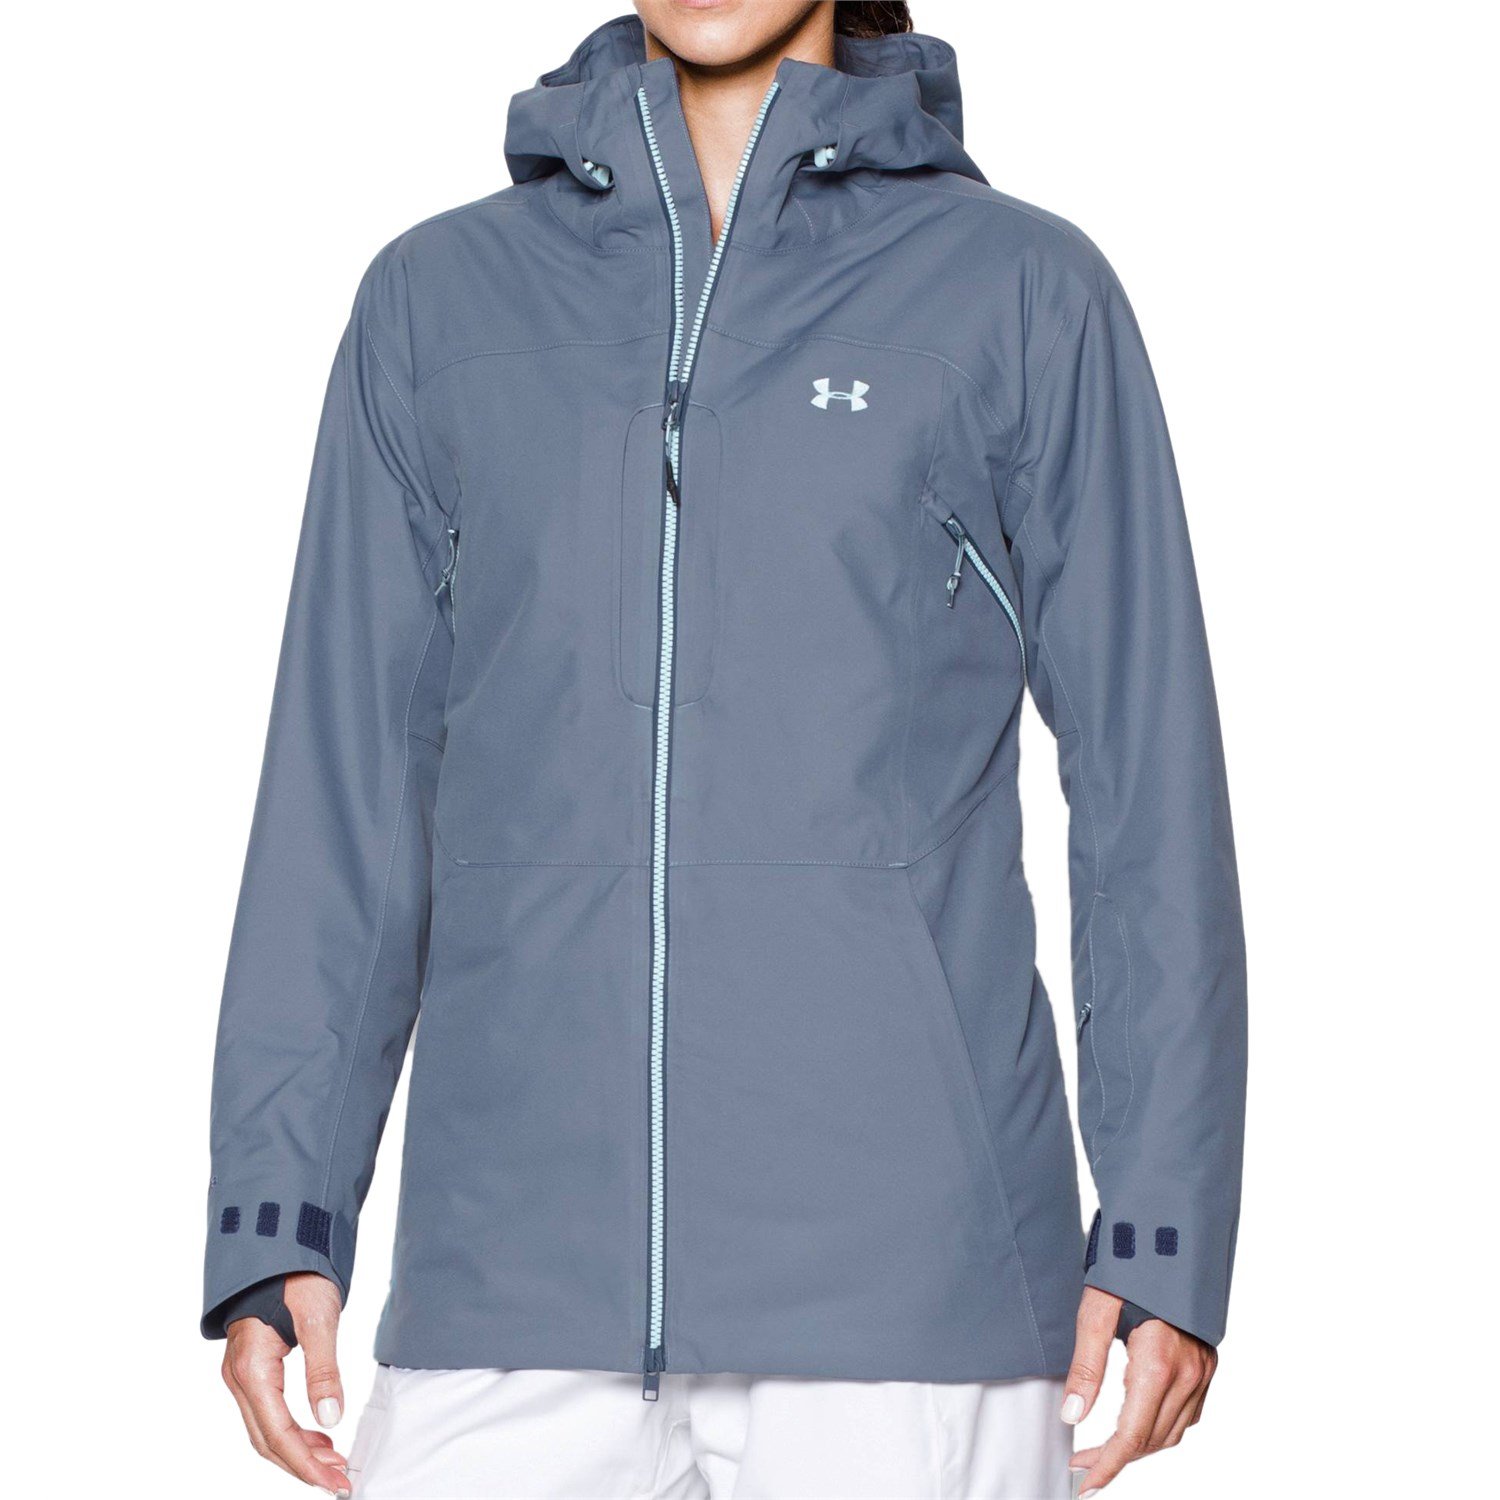 Cheap under armor jackets on sale Buy 